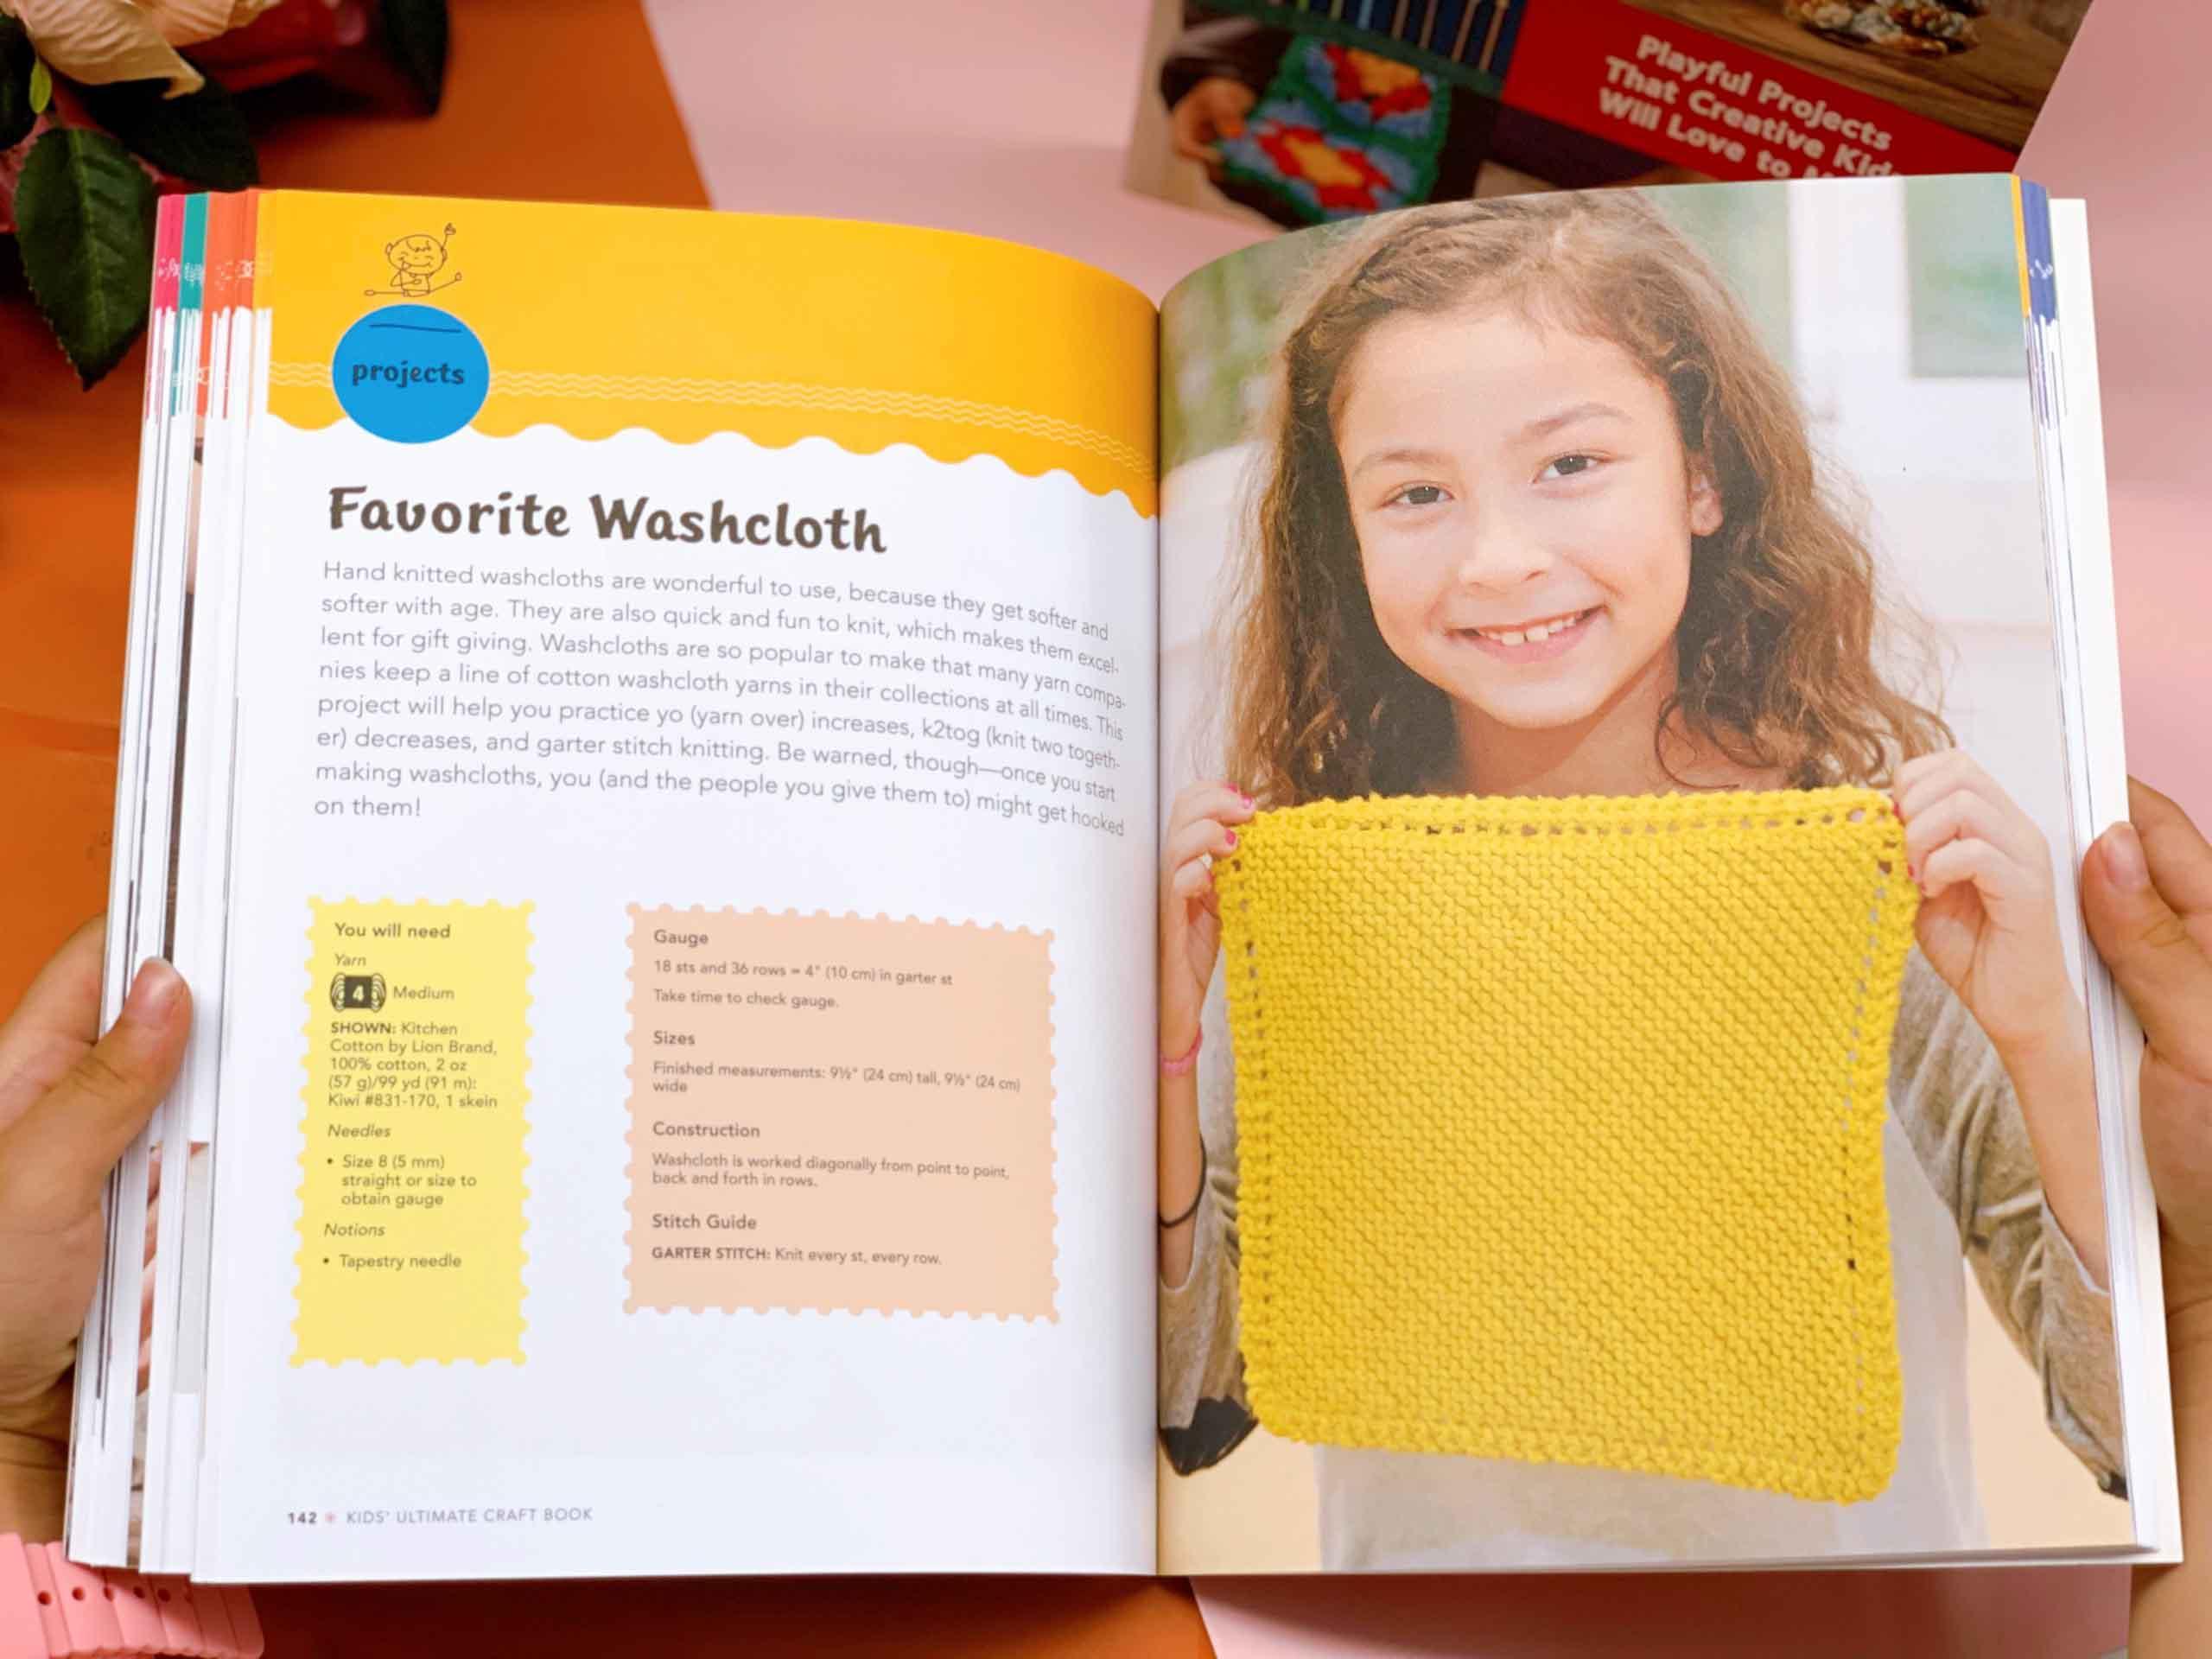 Kids' Ultimate Craft Book : Bead, Crochet, Knot, Braid, Knit, Sew! - Playful Projects That Creative Kids Will Love to Make